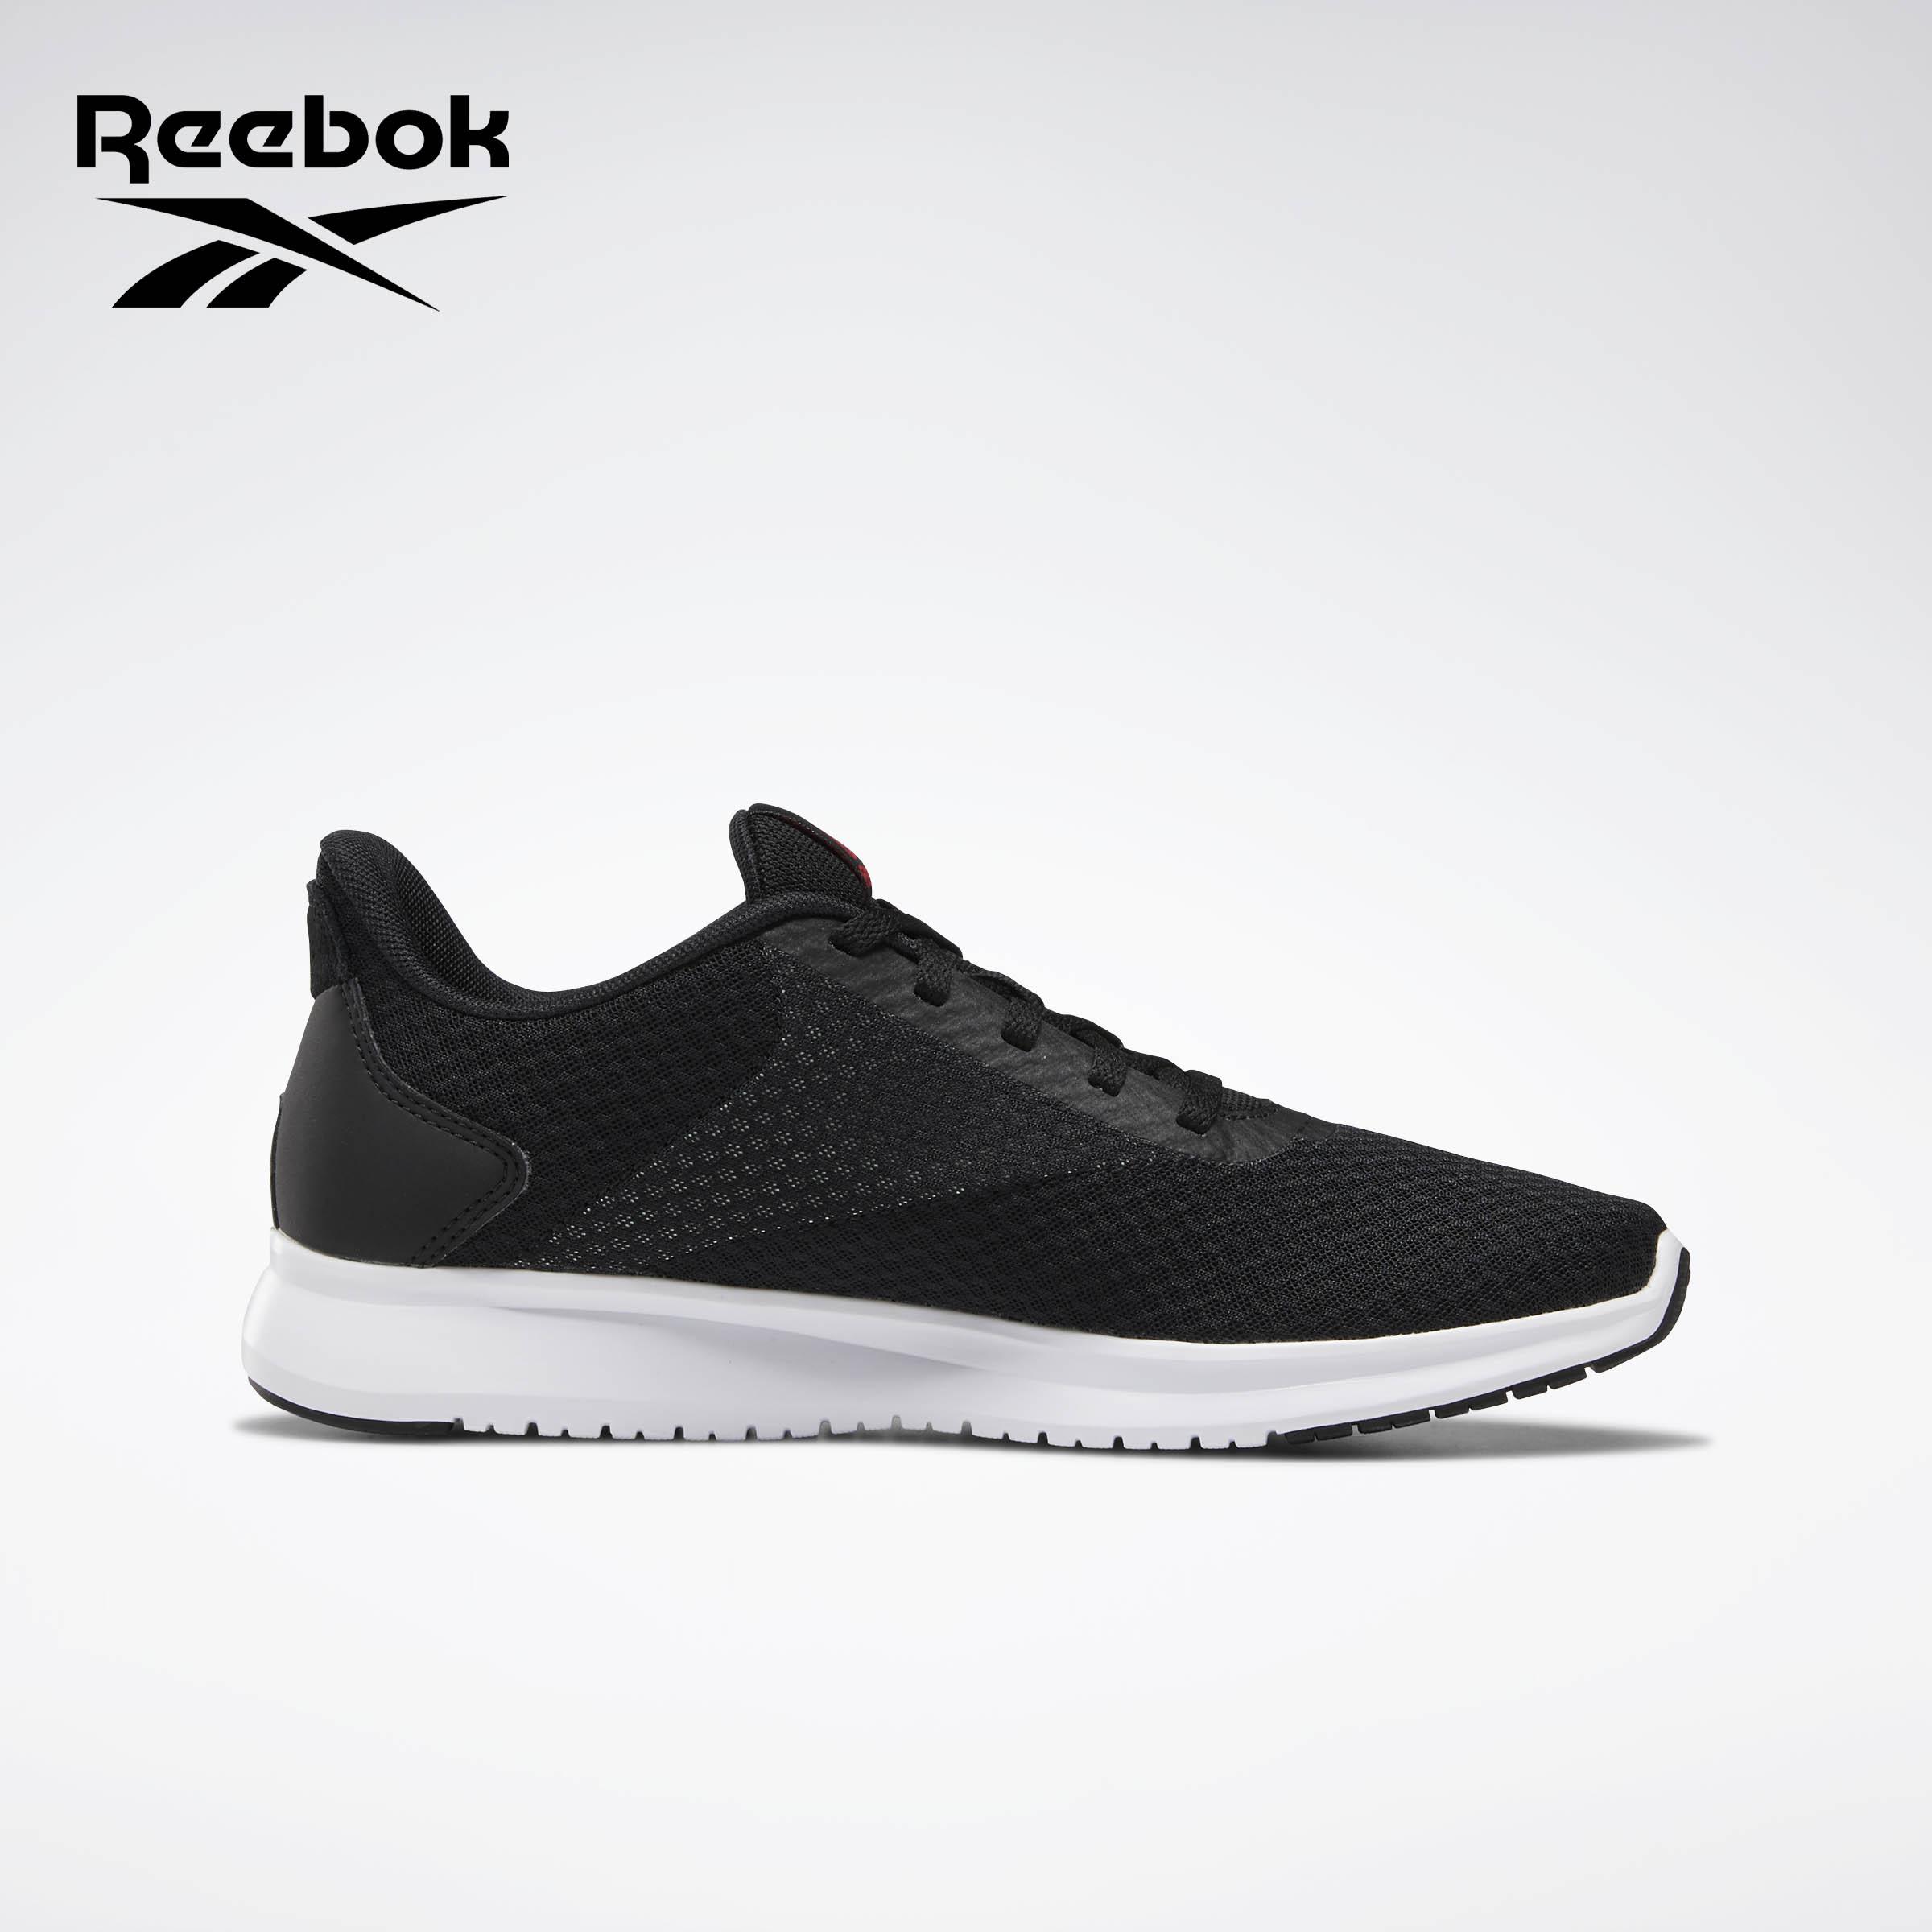 reebok shoes purchase online